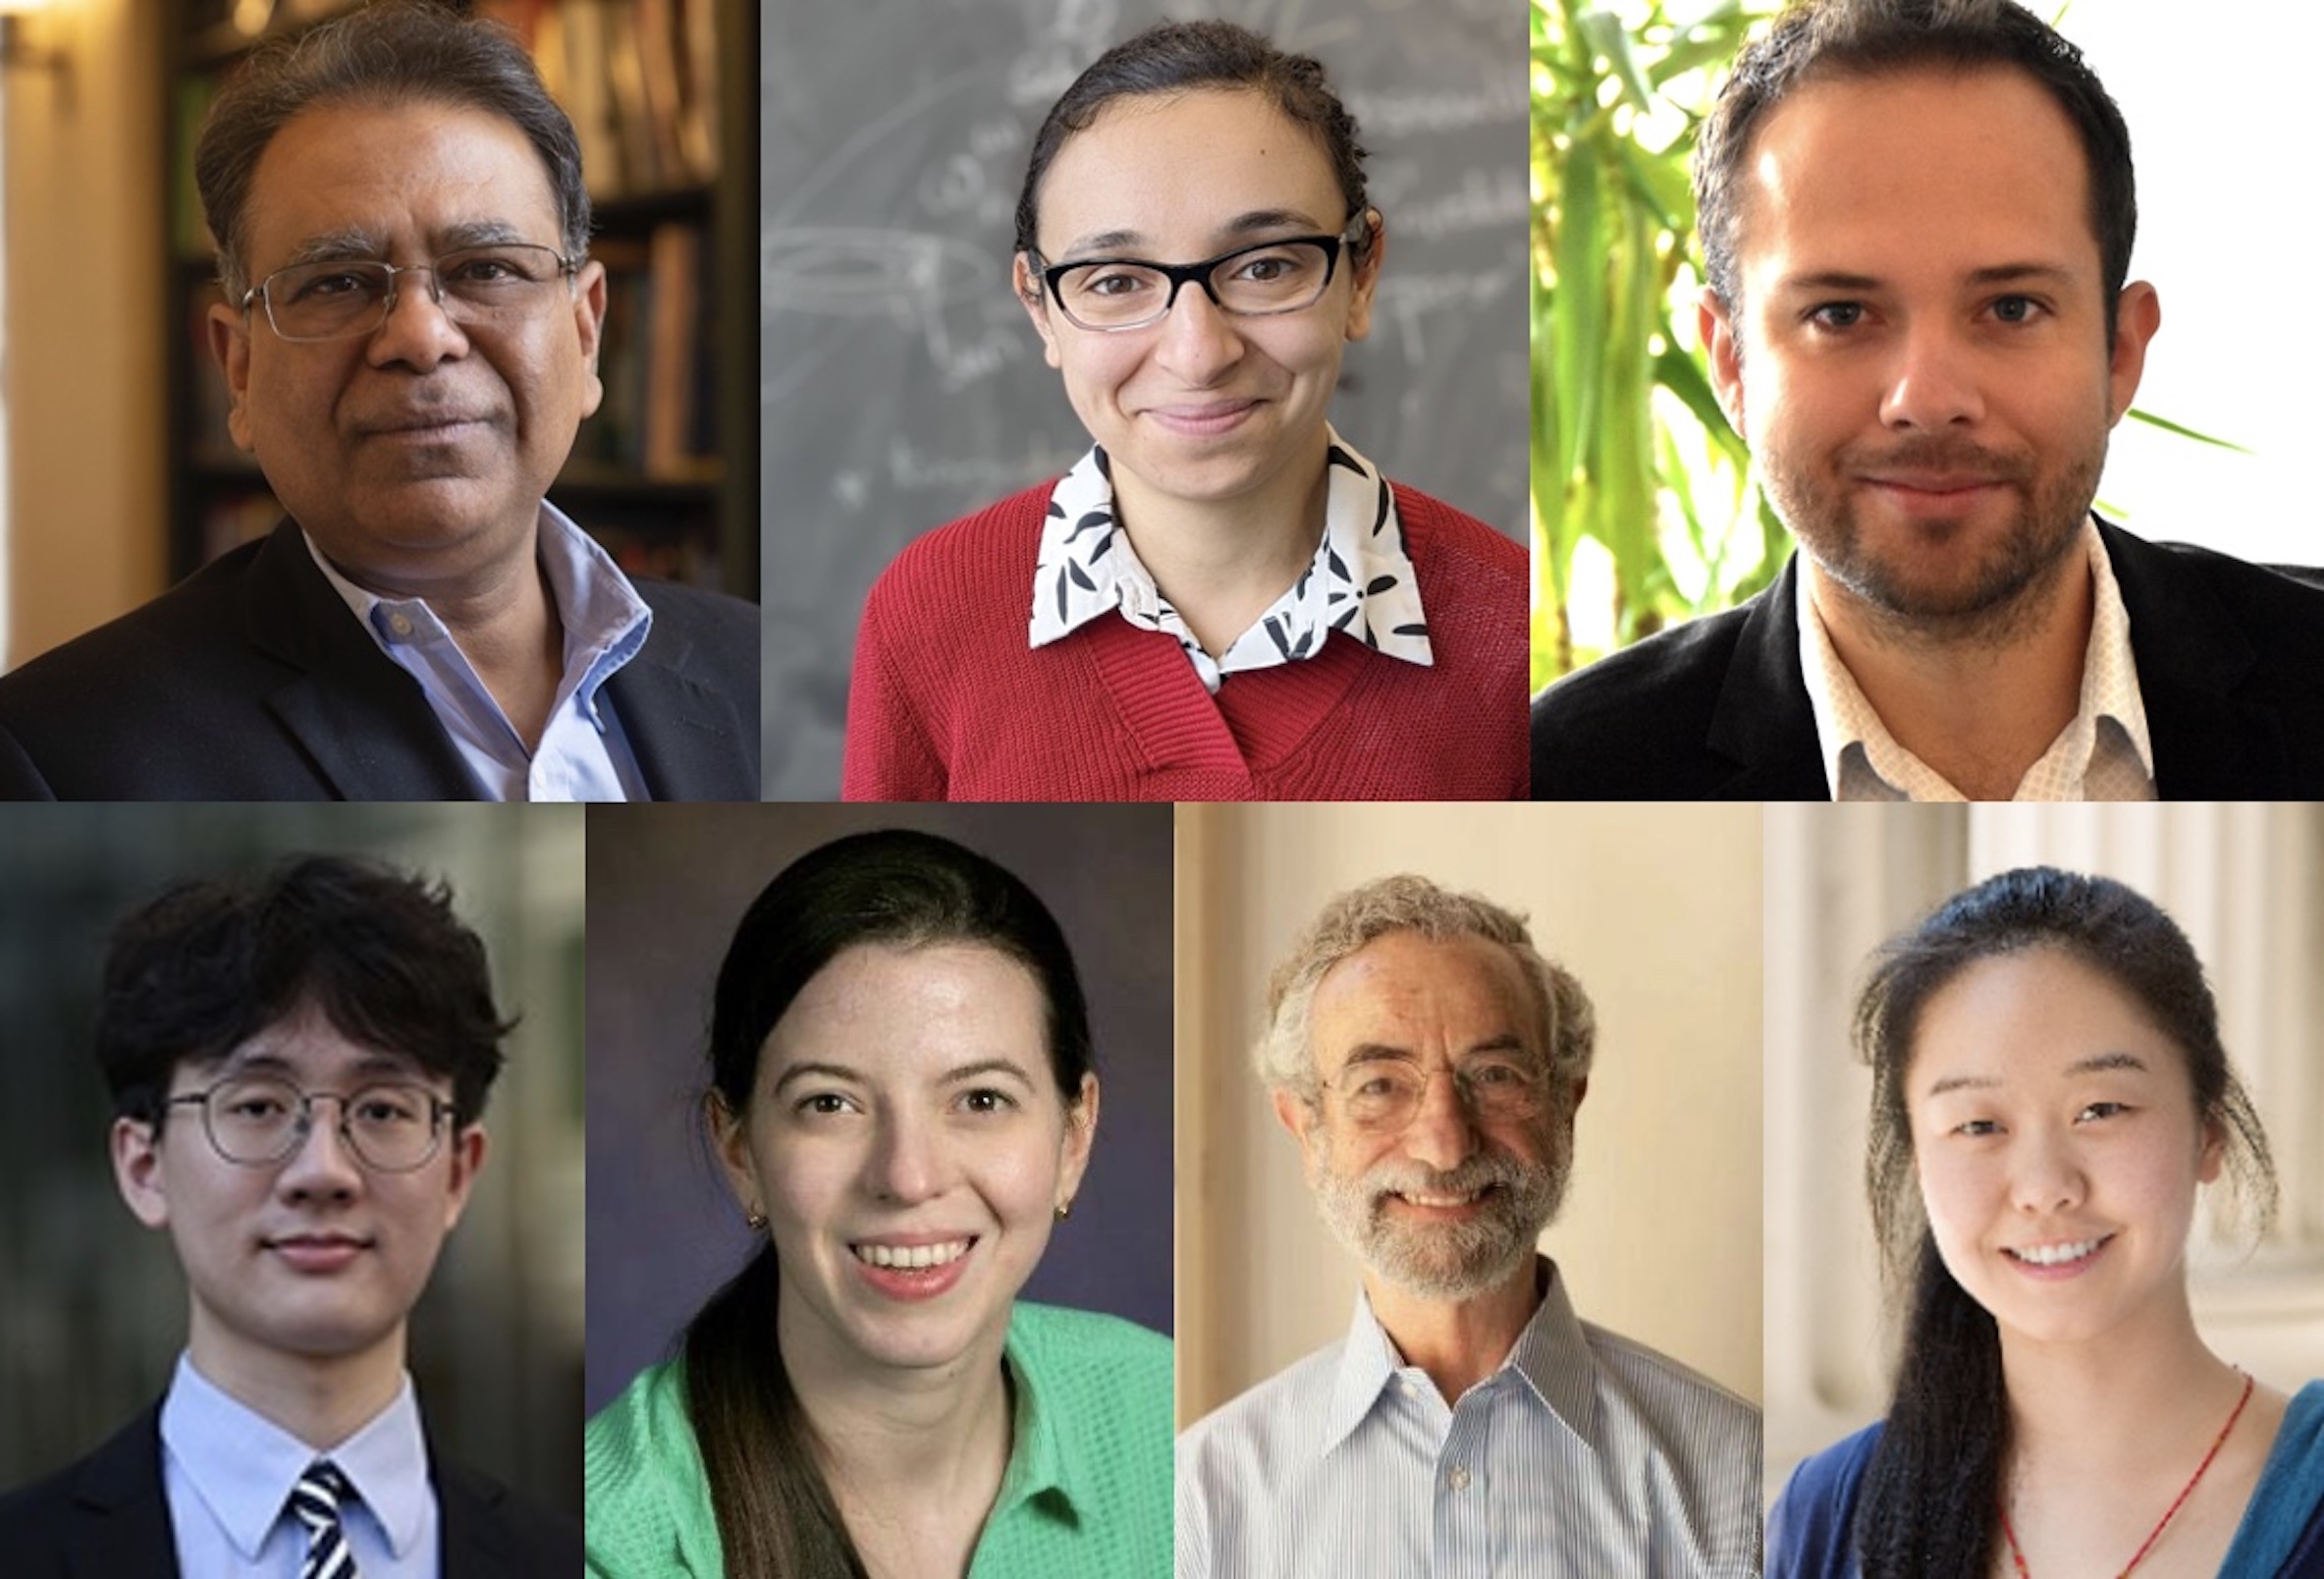 Seven with MIT ties receive awards from the American Physical Society